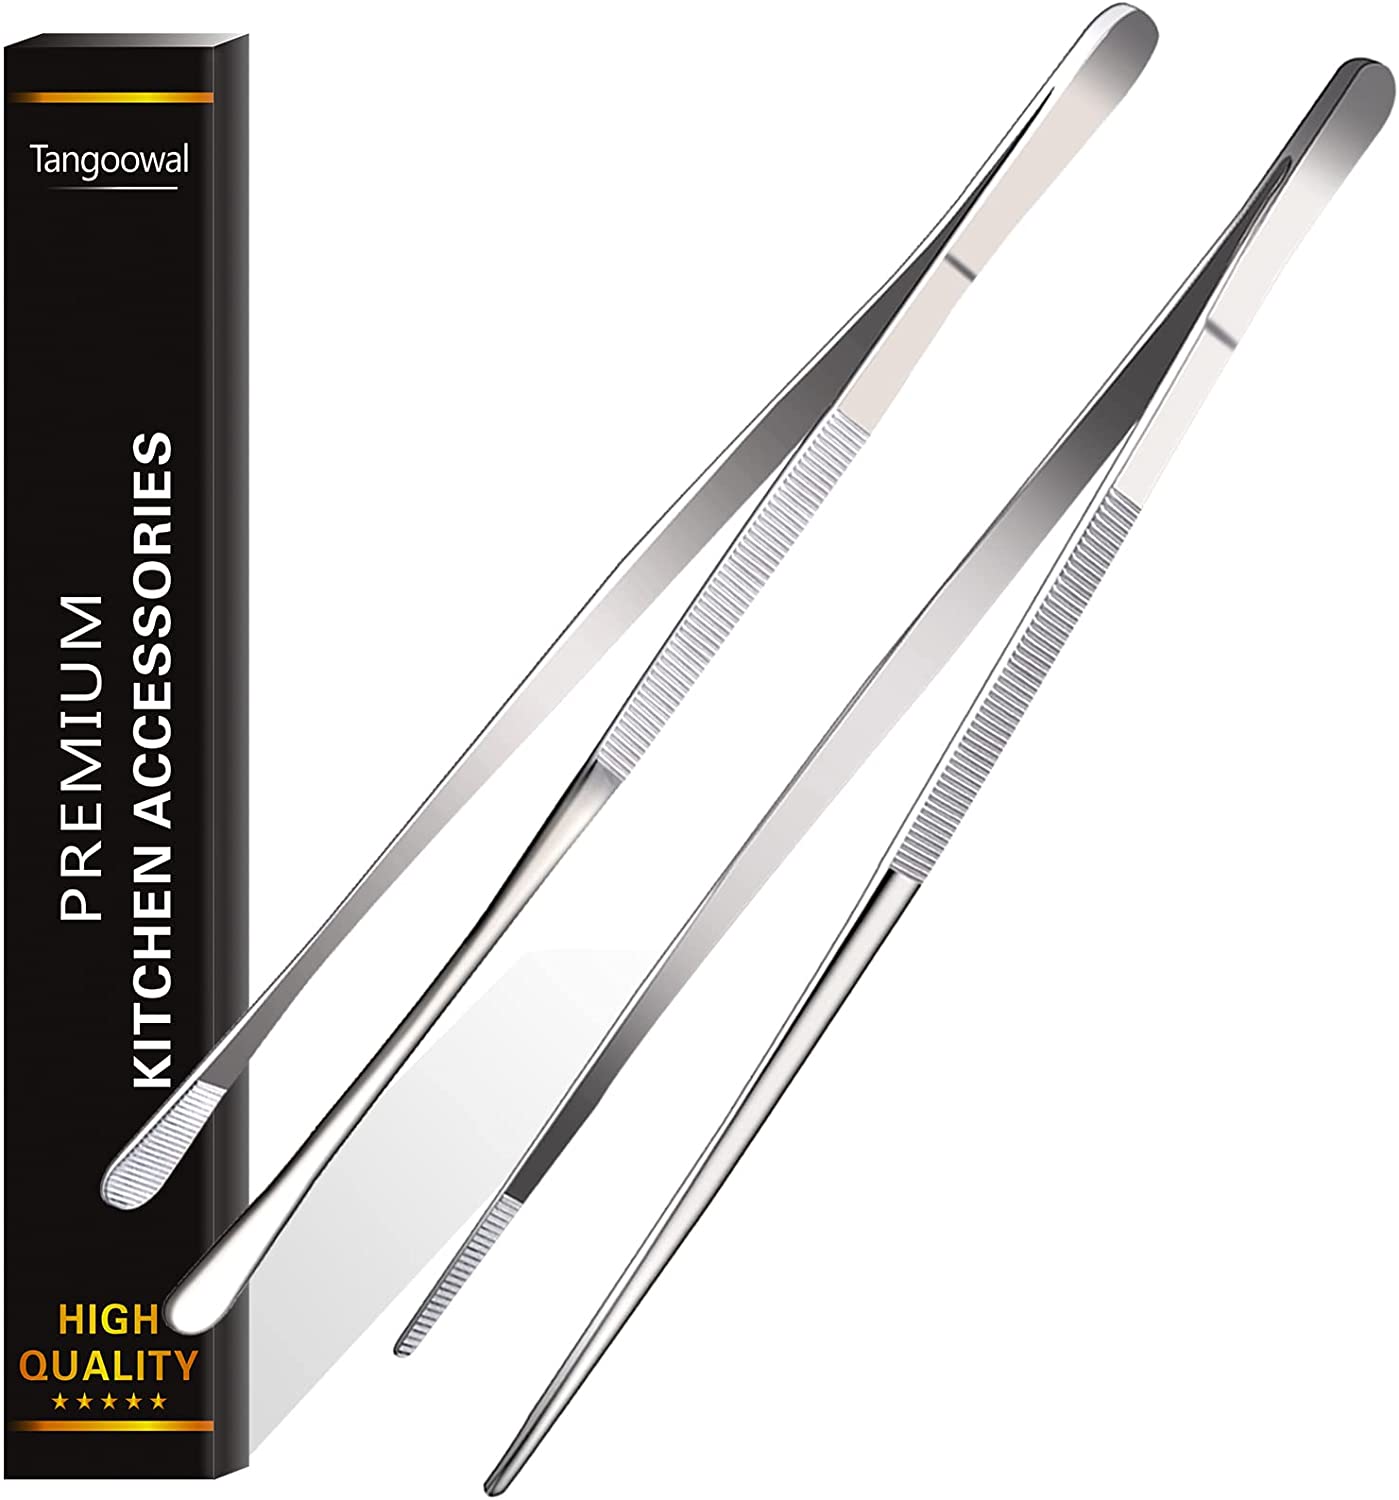 Pair of Stainless Steel Tweezers for Cast Iron Cookware